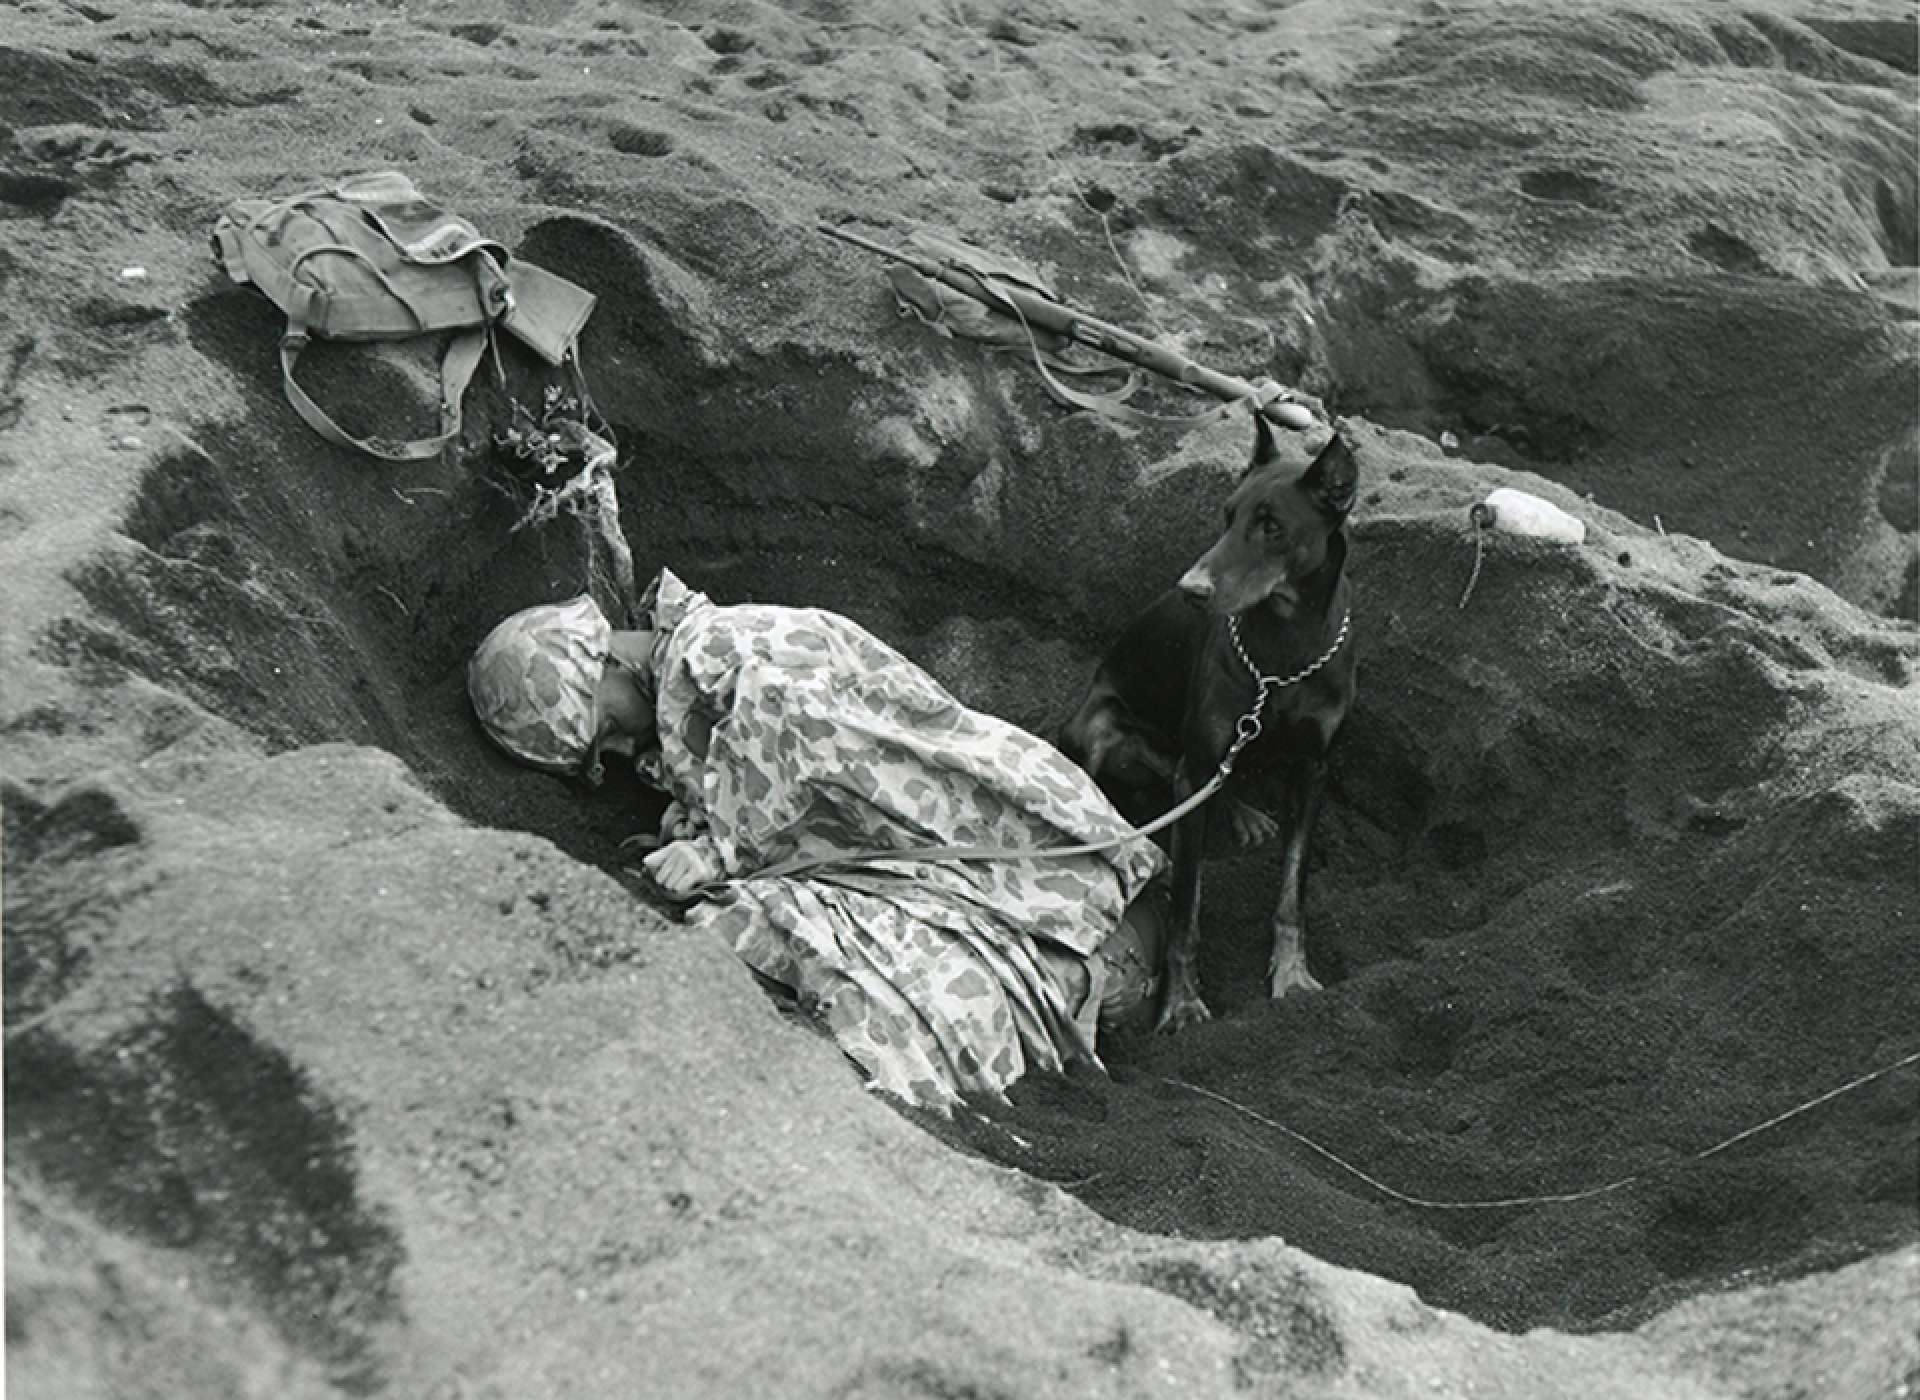 Pfc. Rez P. Hester of the U.S. Marine Corps’ 7th War Dog Platoon on Iwo Jima takes a nap while Butch stands guard. Trained and sent into battle together, war dogs and their partners developed mutual loyalty, protectiveness, and love. National Archives photo.